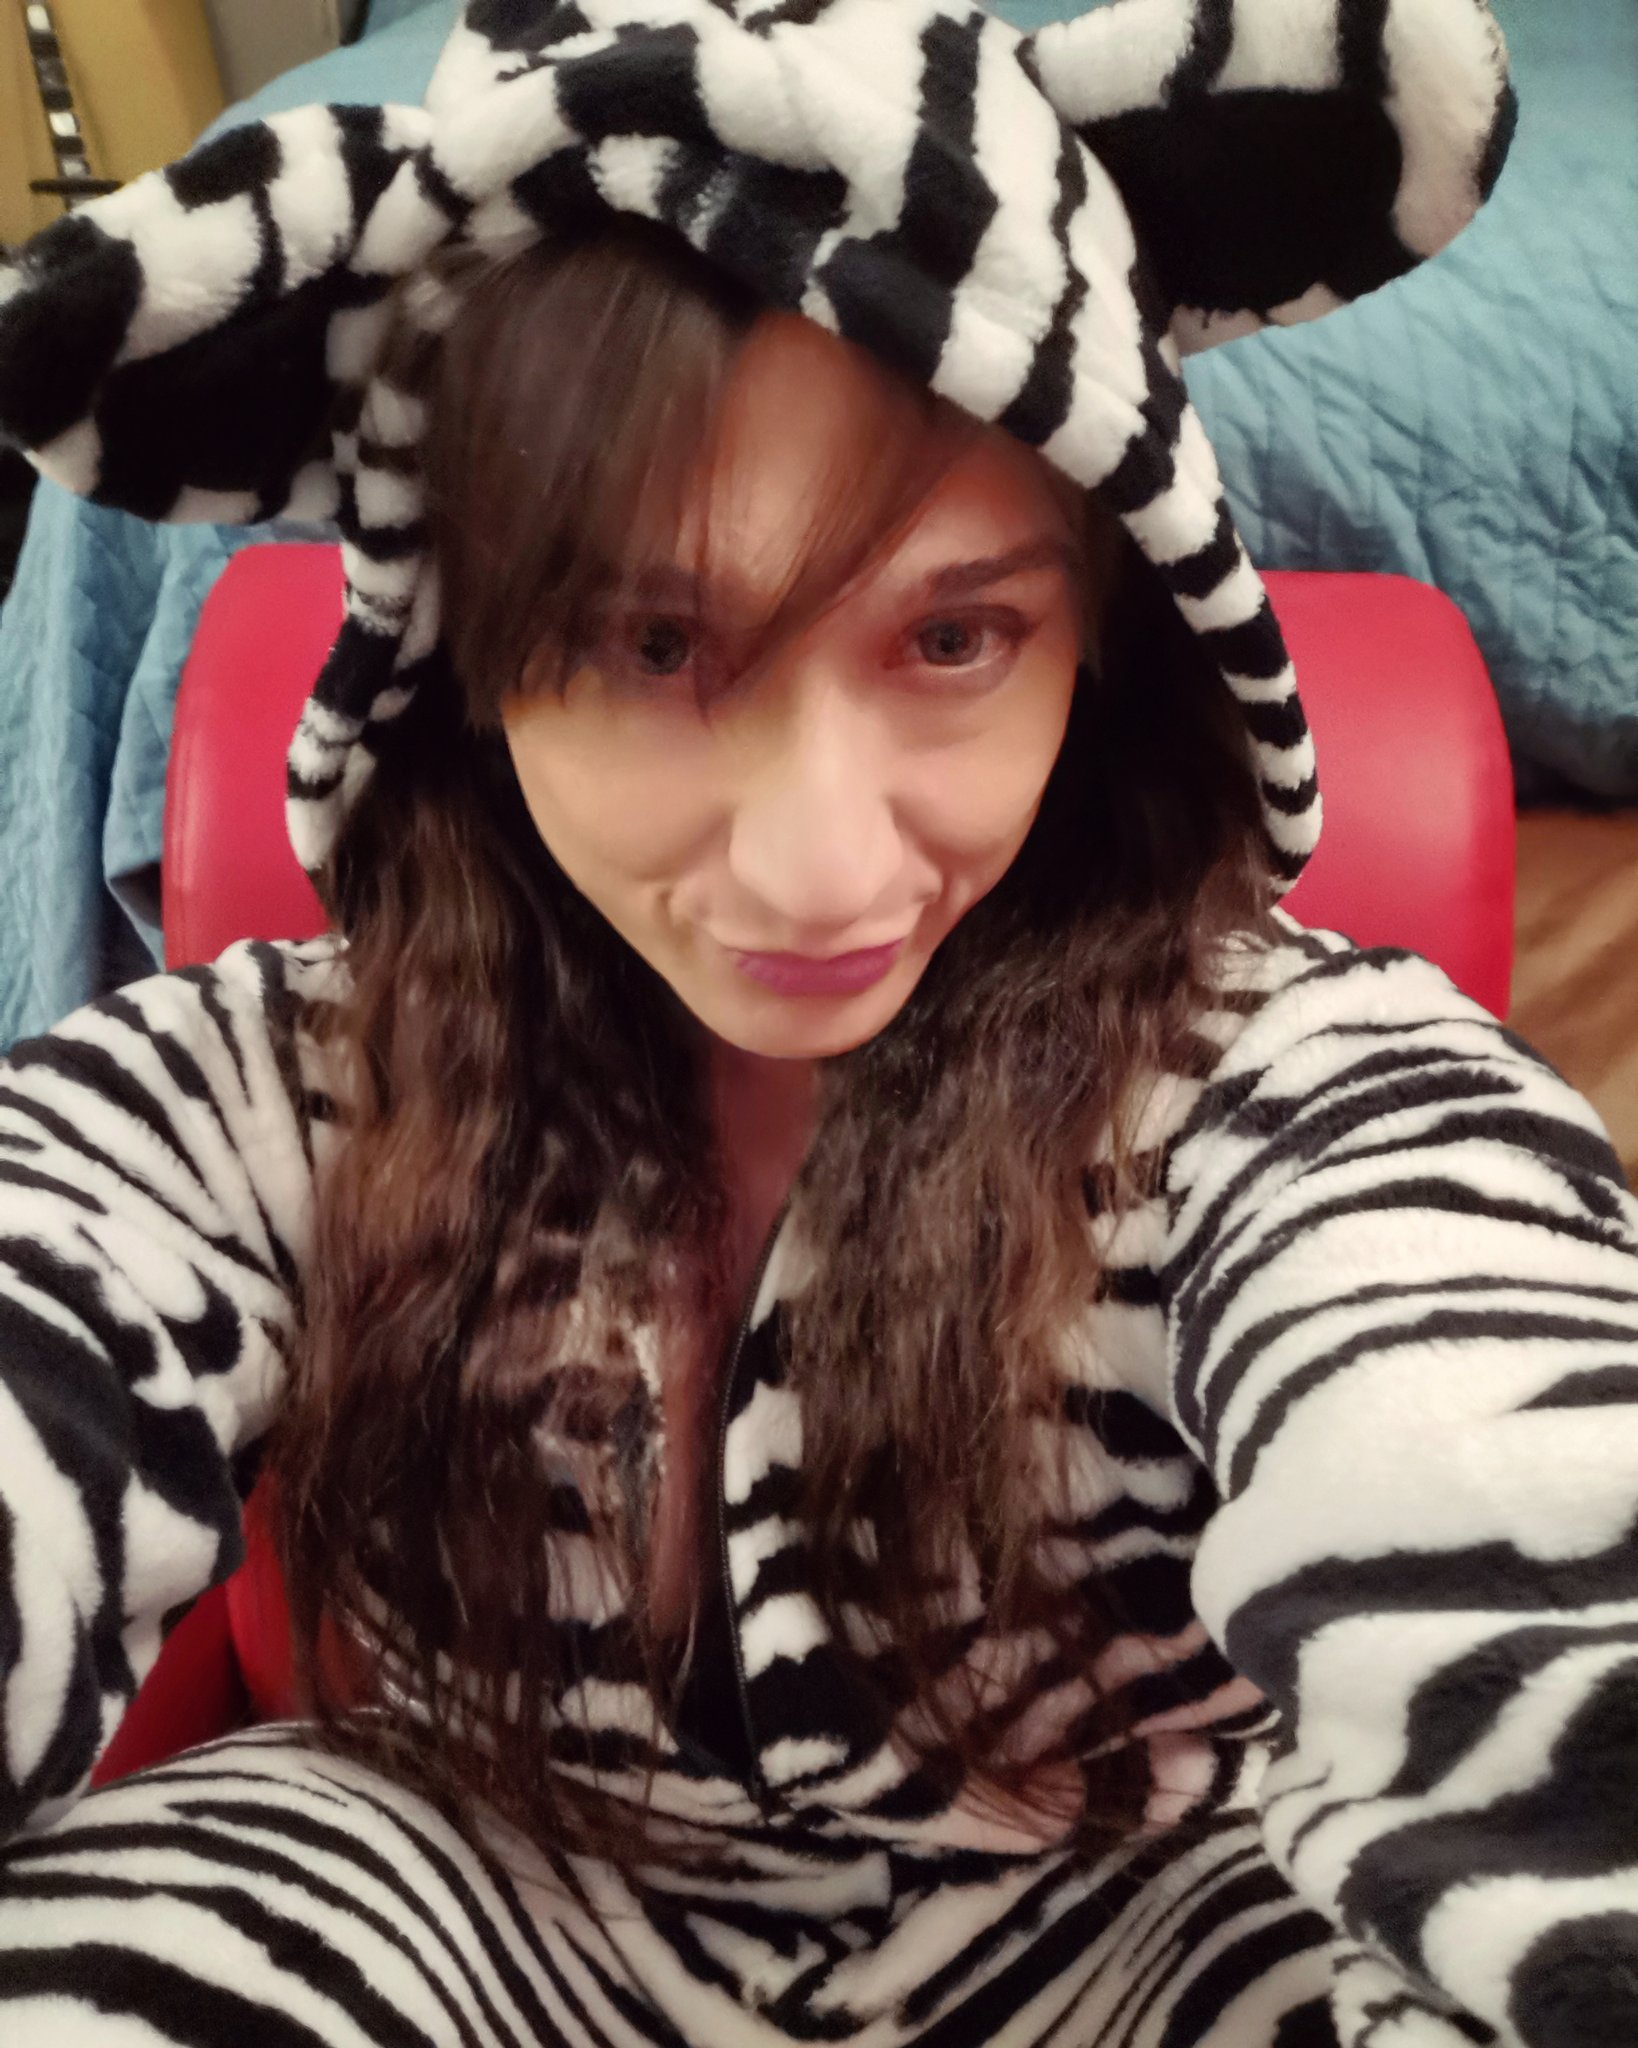 4 pic. Chica peluche 🦓🦓😋🤣🤣🤣 https://t.co/6tMR22F3Gy